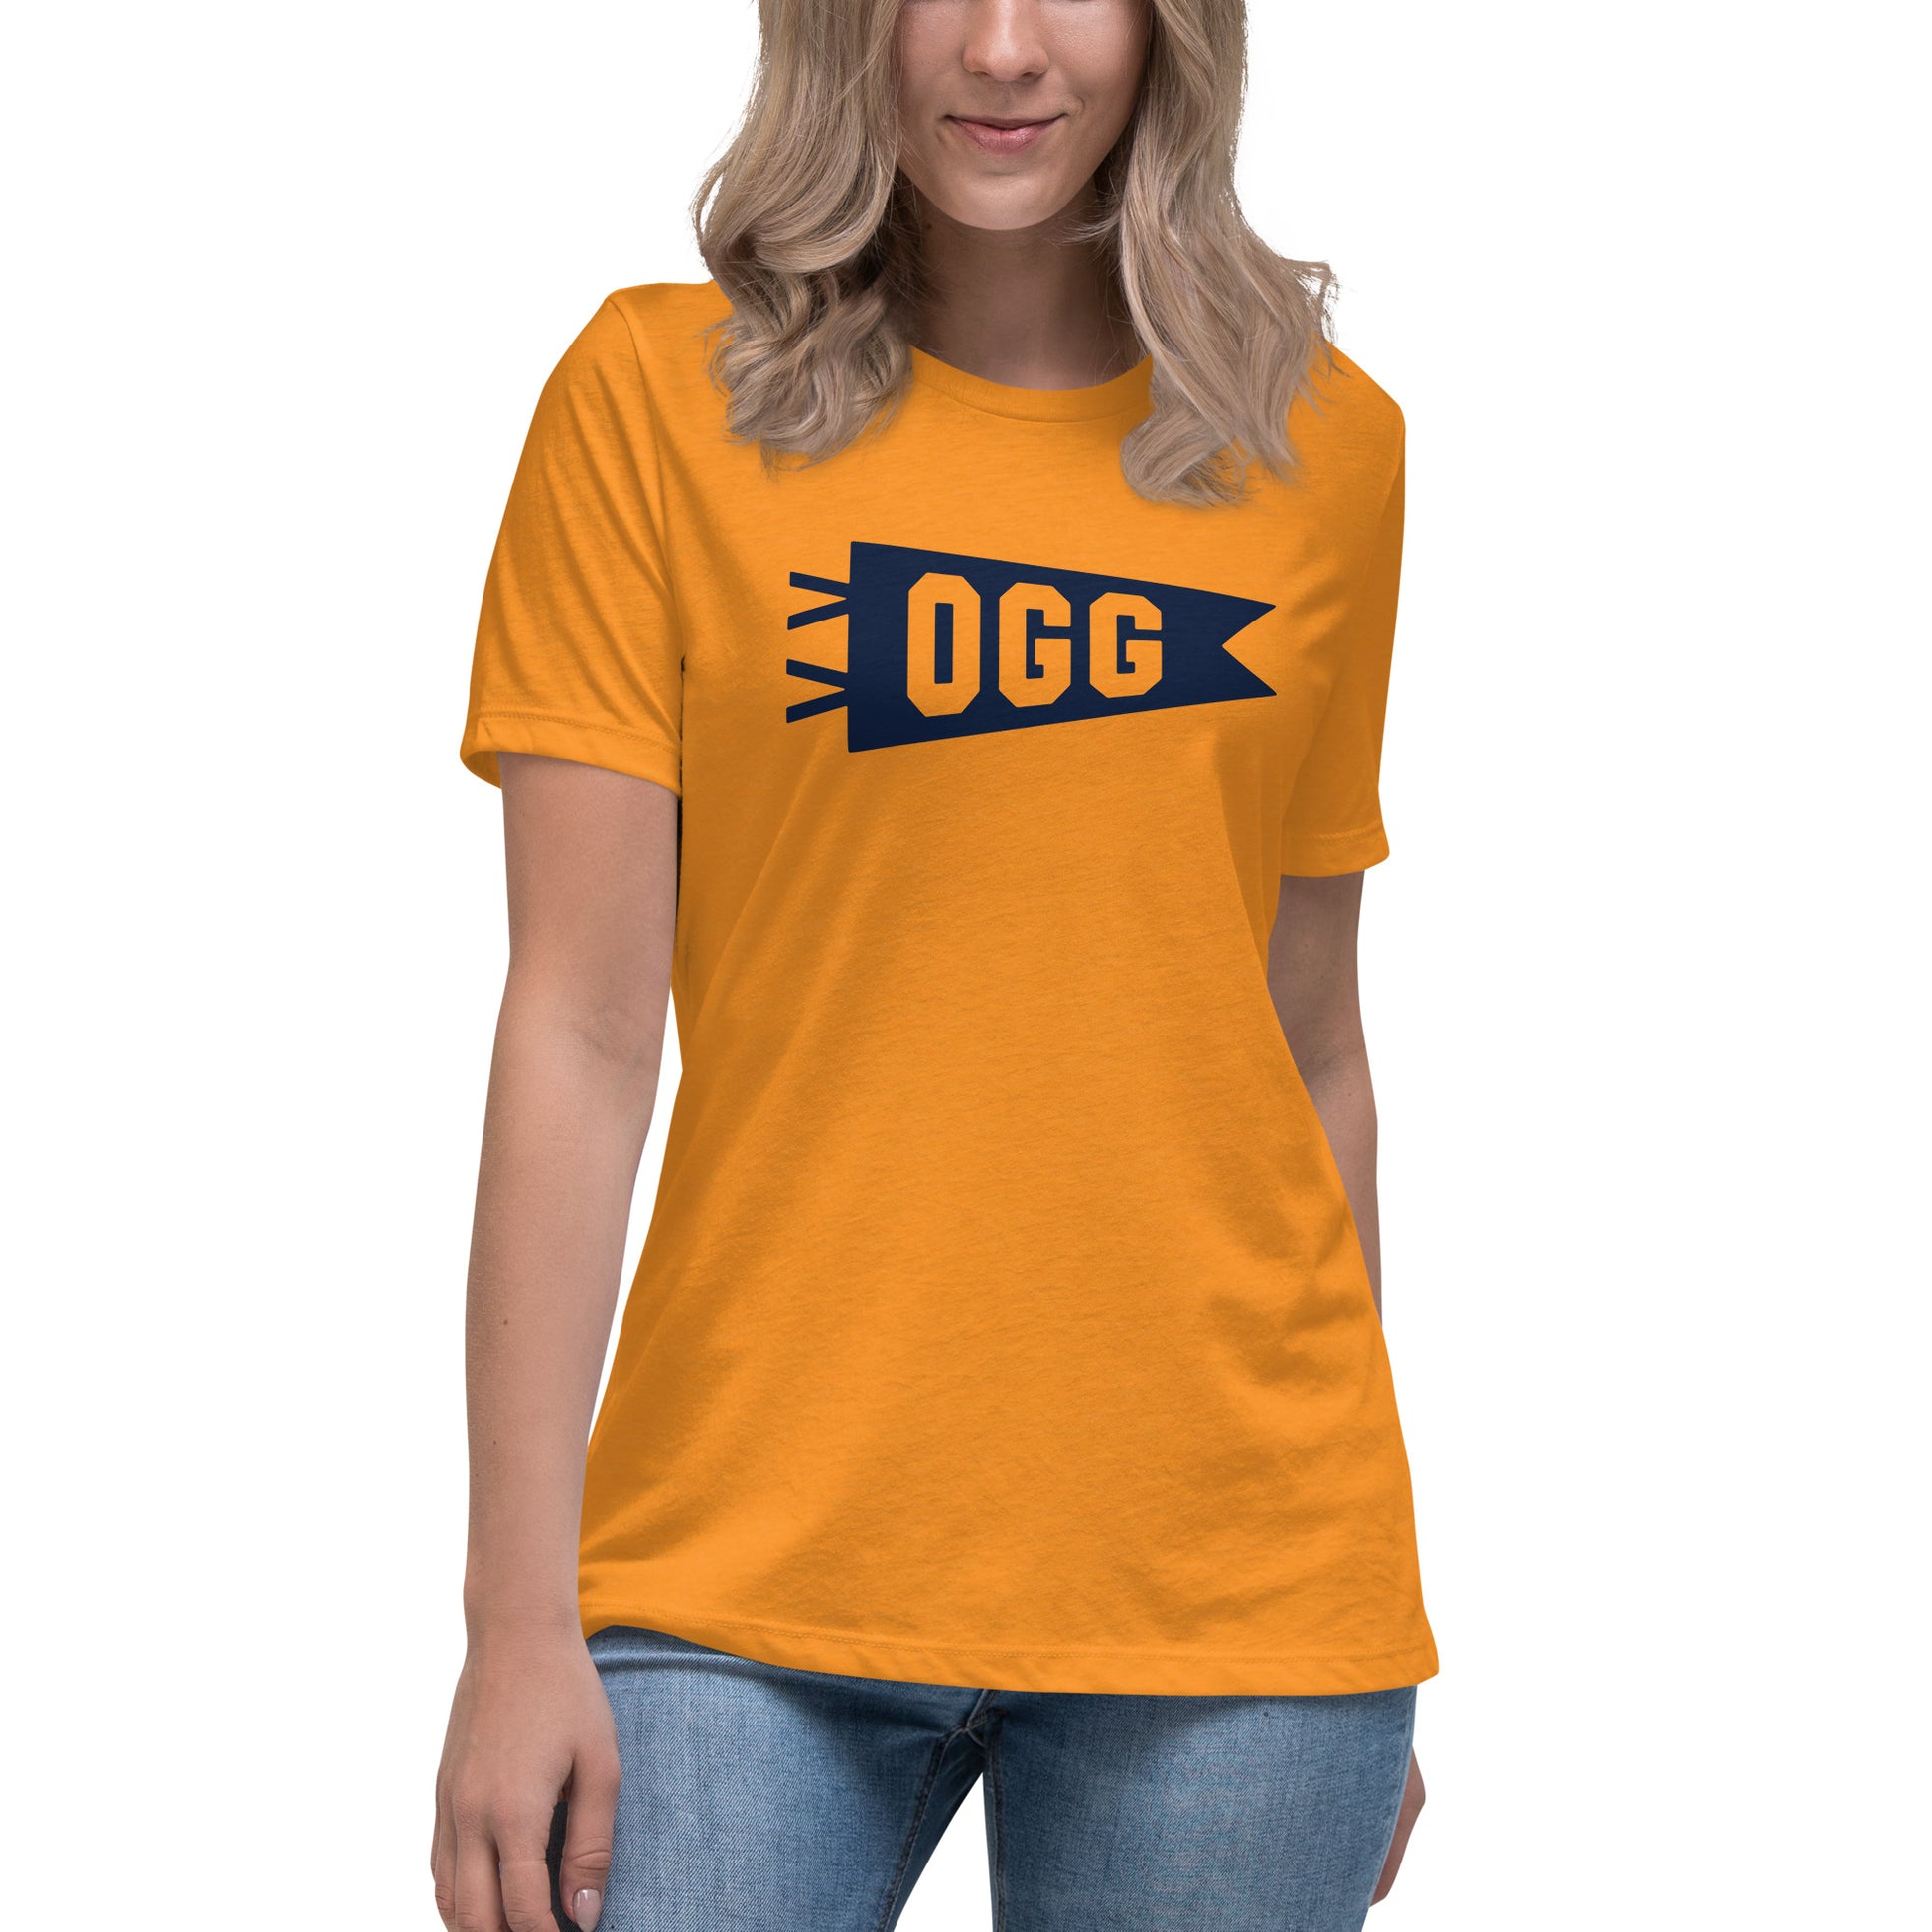 Airport Code Women's Tee - Navy Blue Graphic • OGG Maui • YHM Designs - Image 04